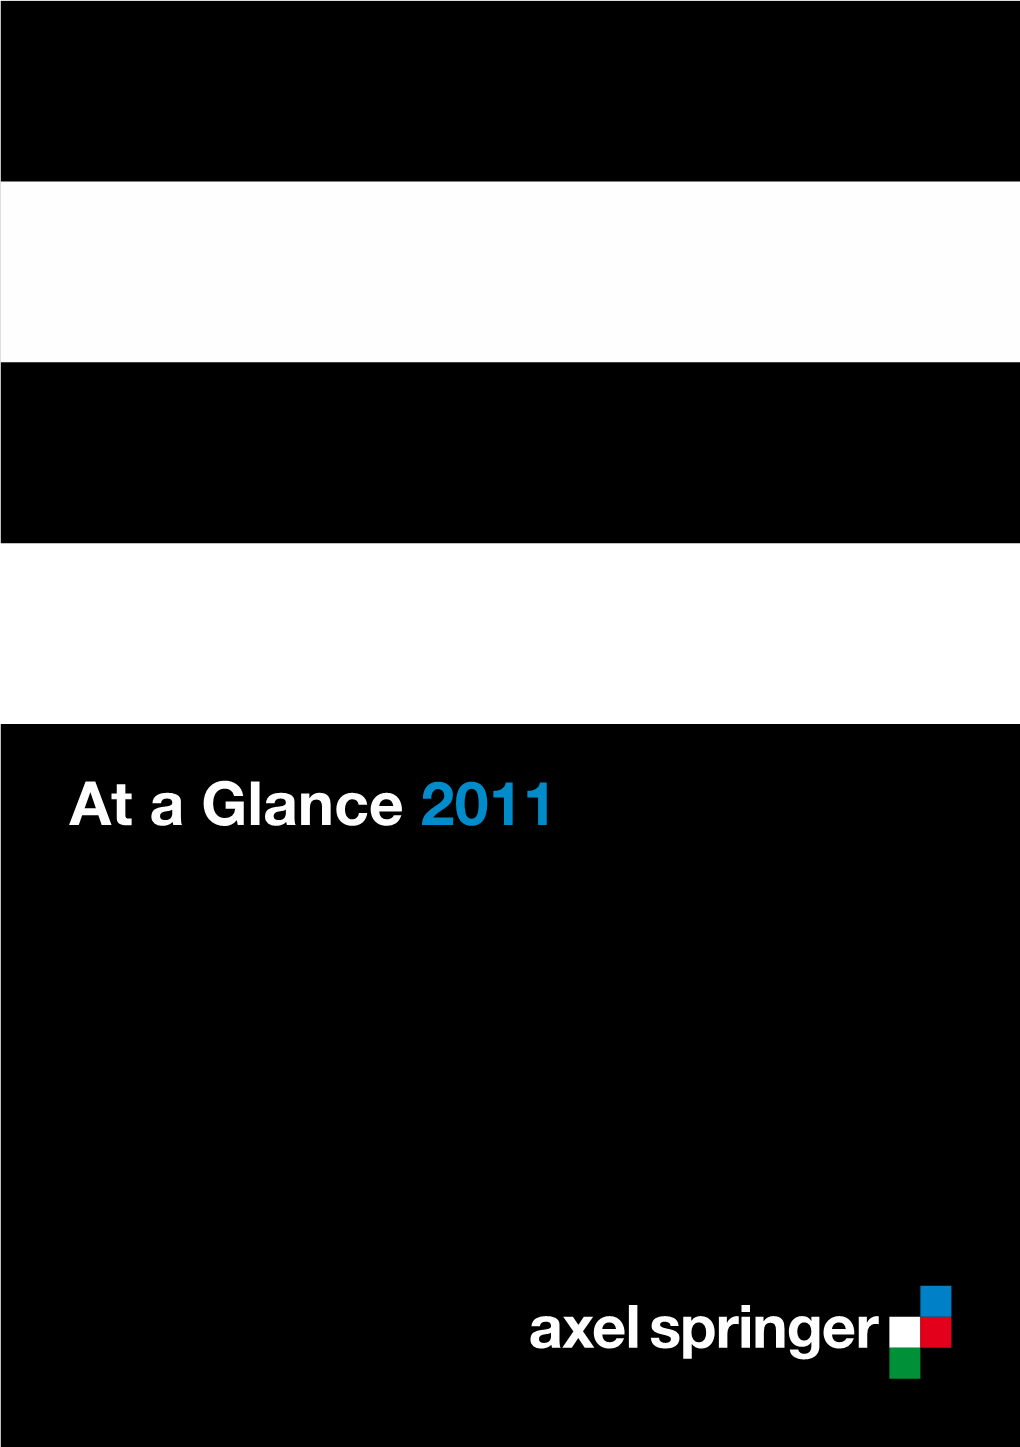 At a Glance 2011